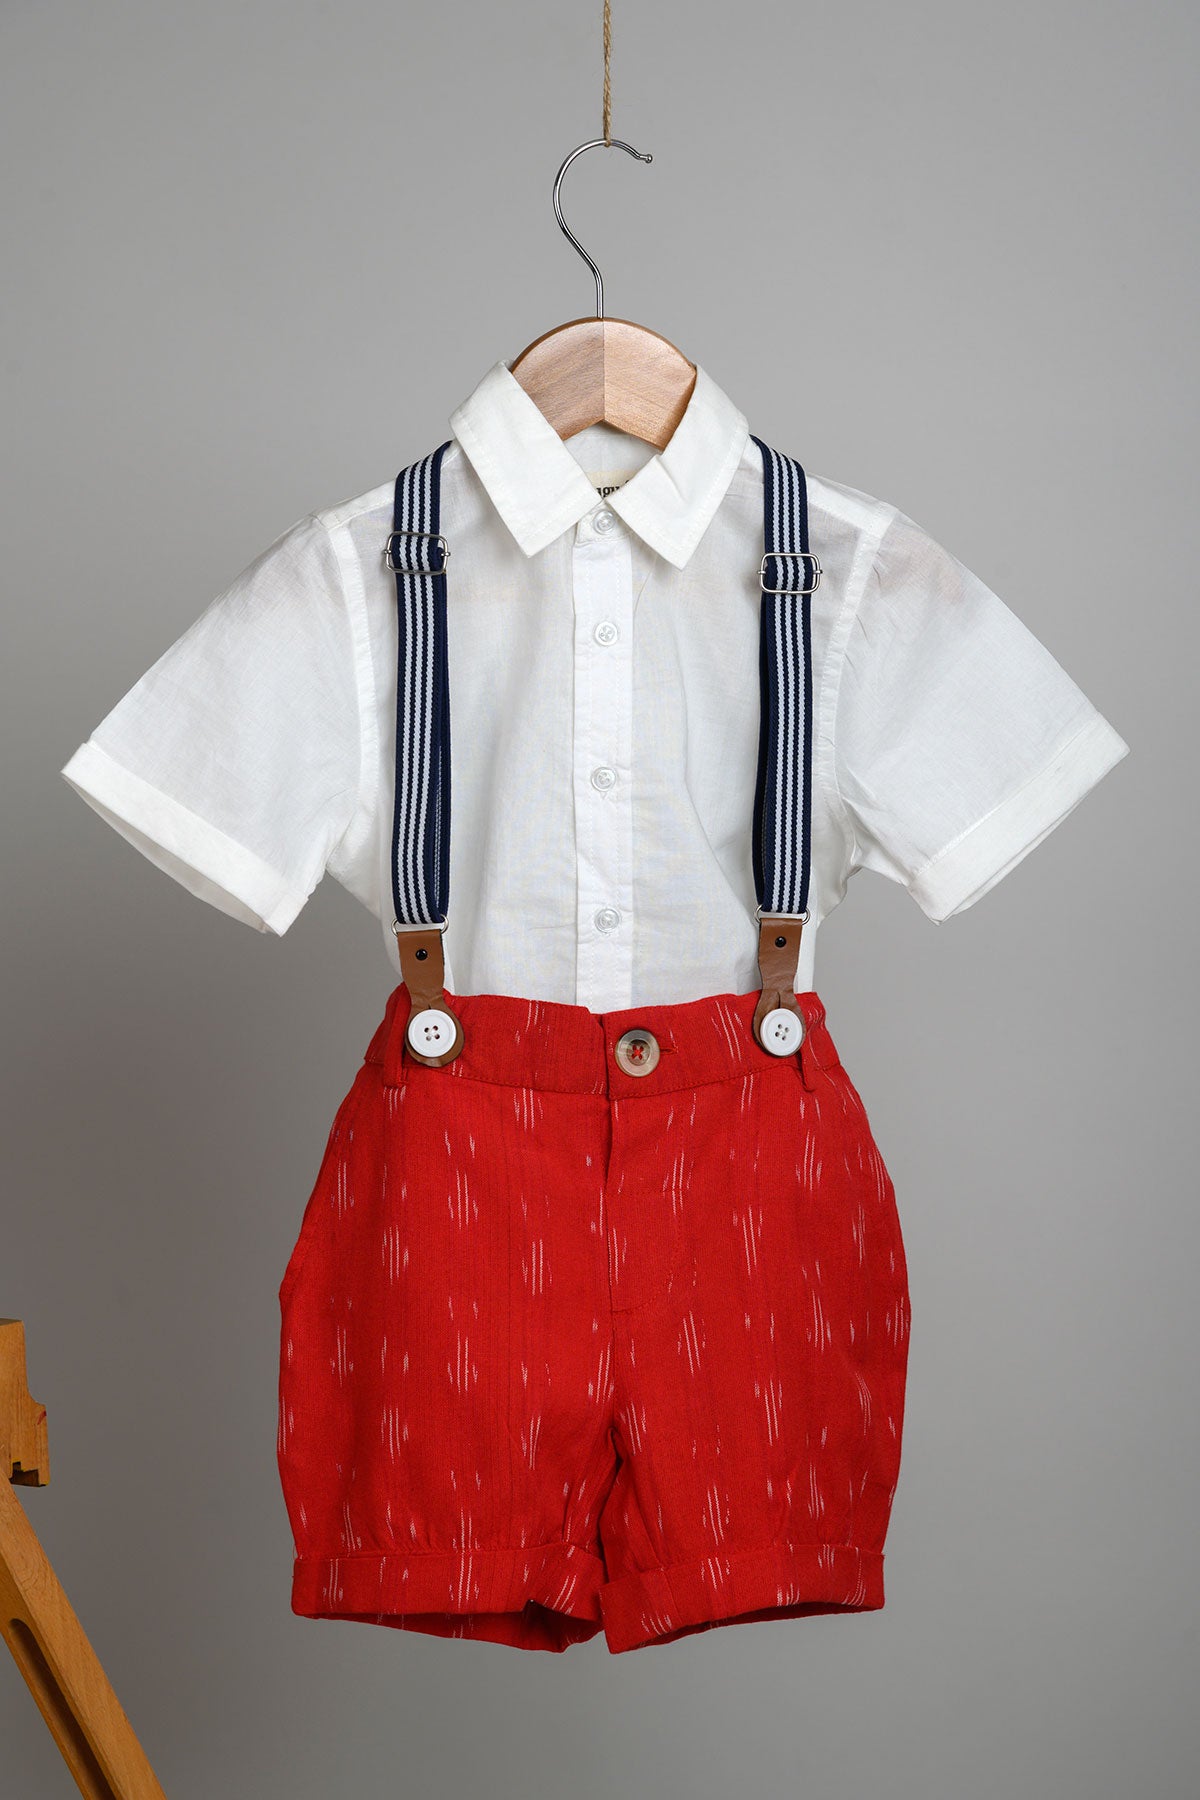 Ladla Ikat Shorts, Shirt and Suspenders Set - Red